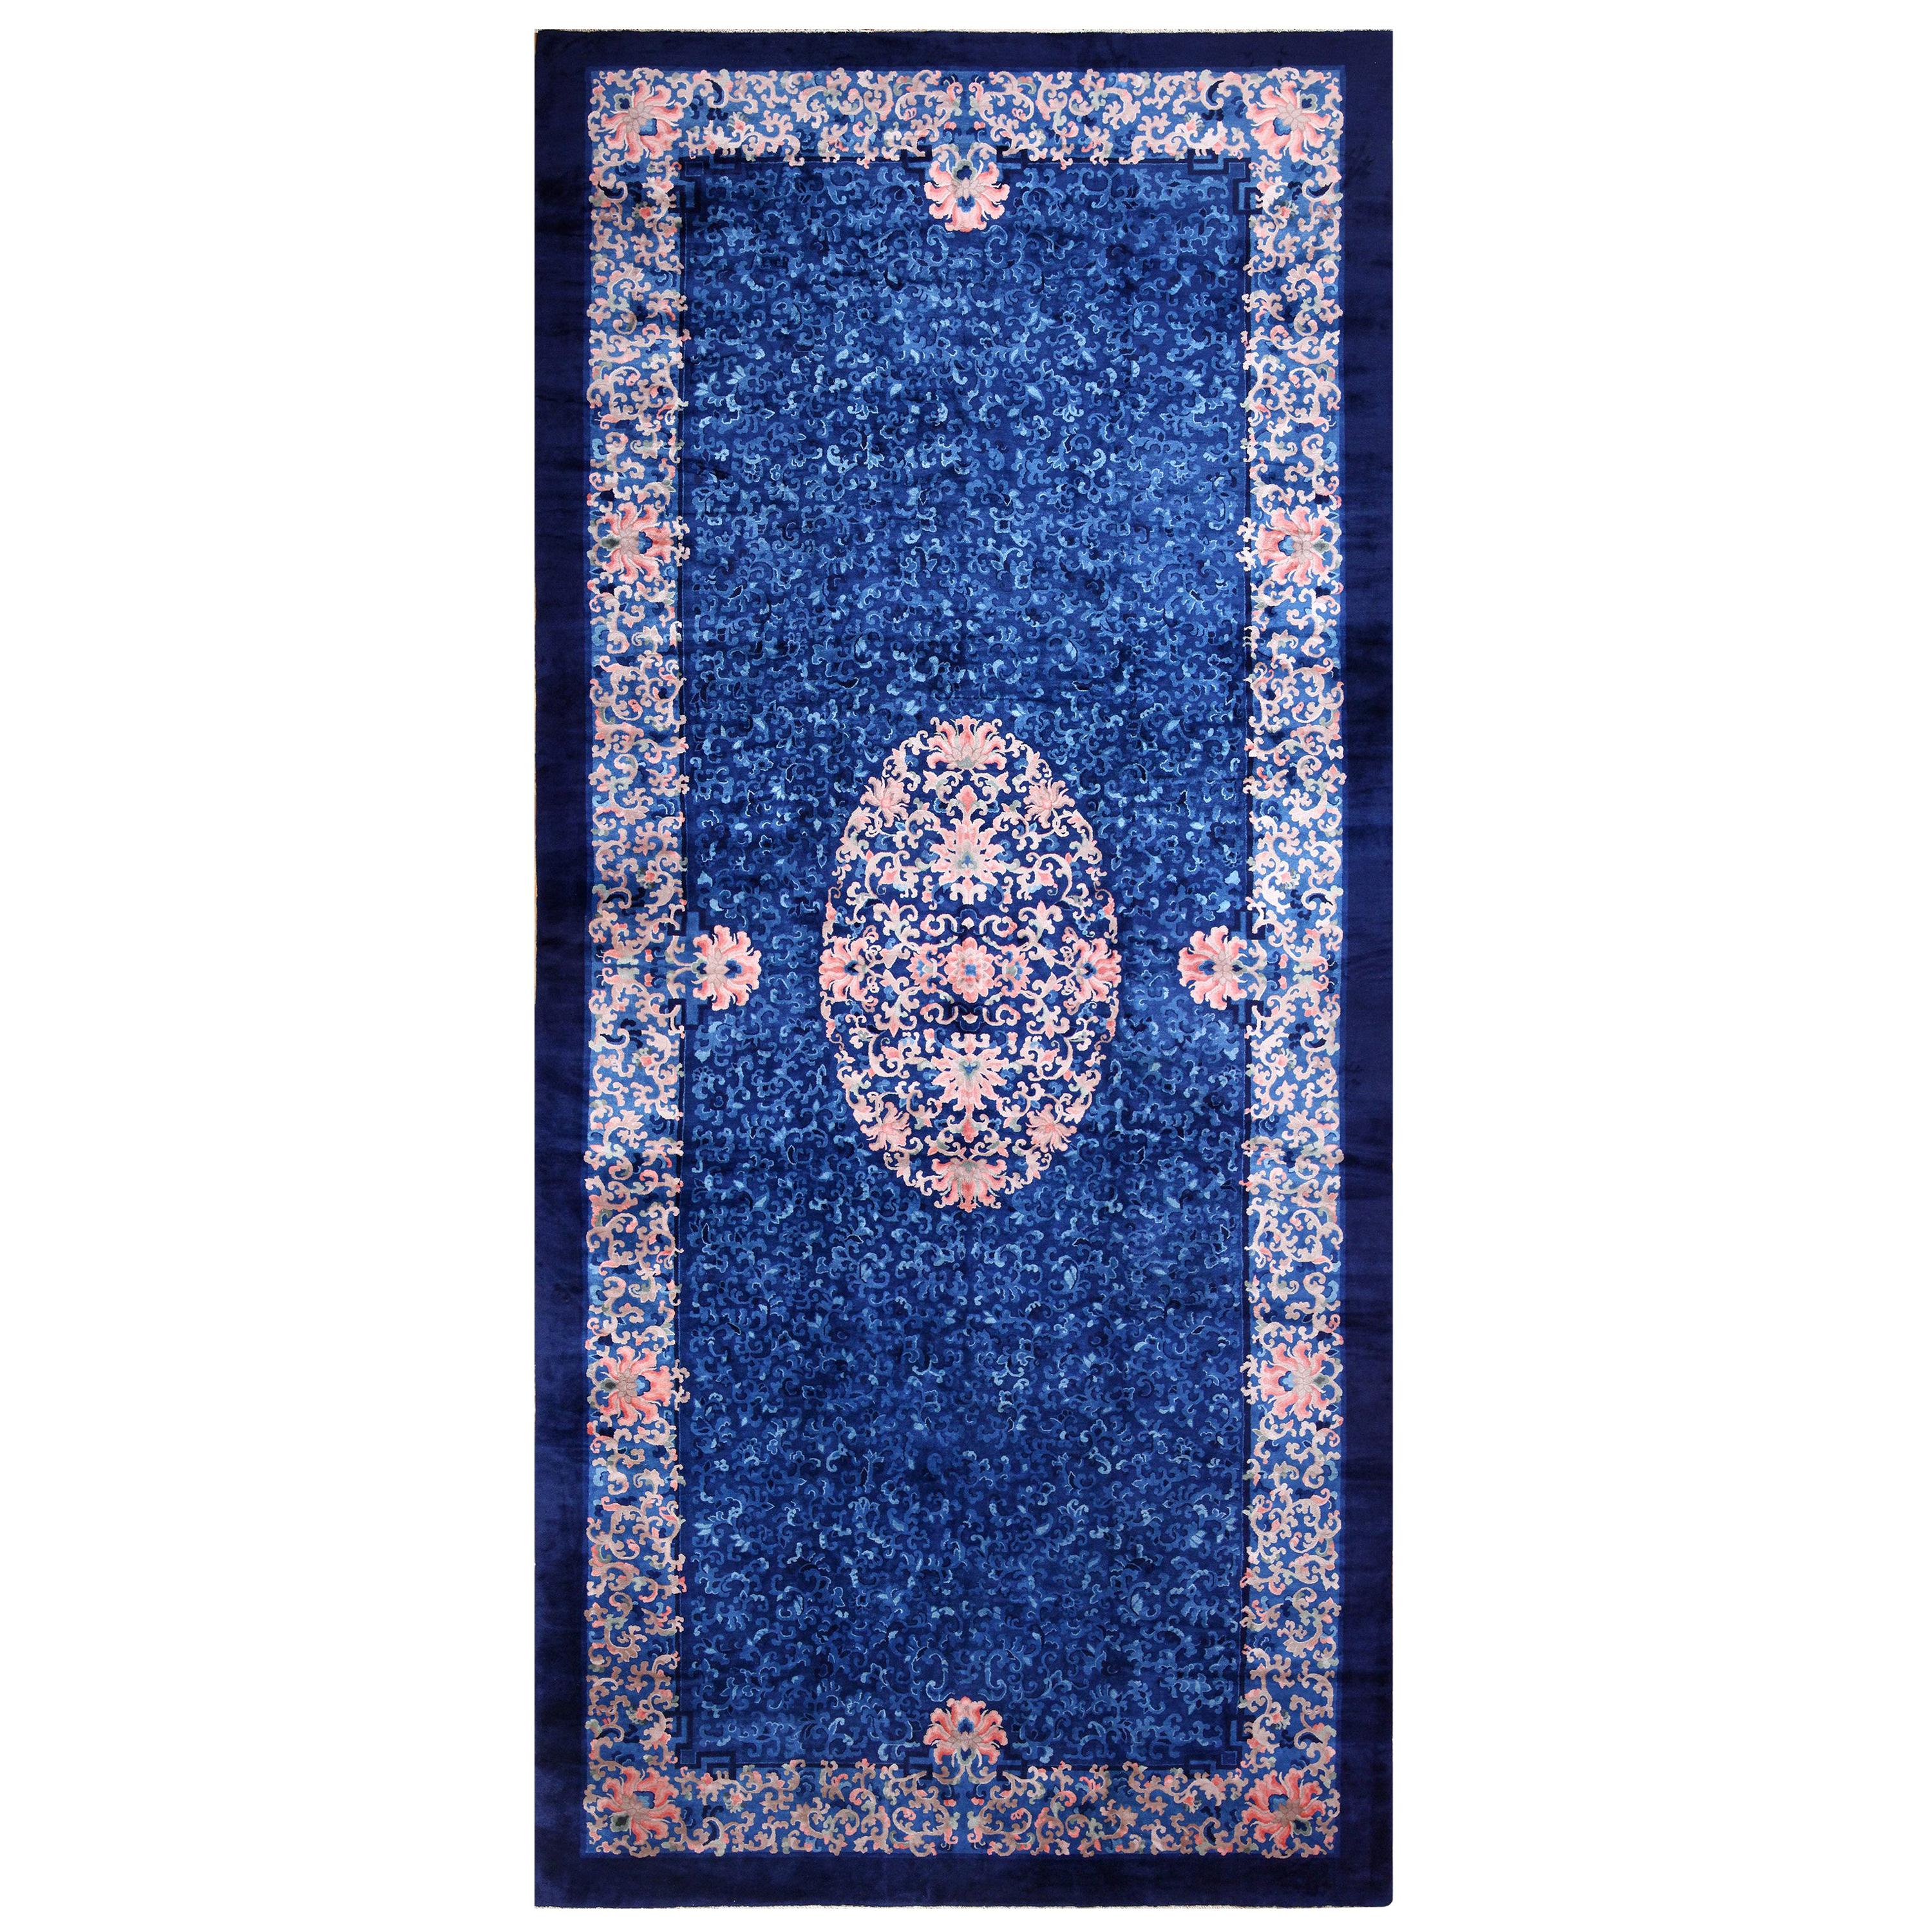 Antique Blue Chinese Rug. Size: 11 ft 1 in x 24 ft 6 in 